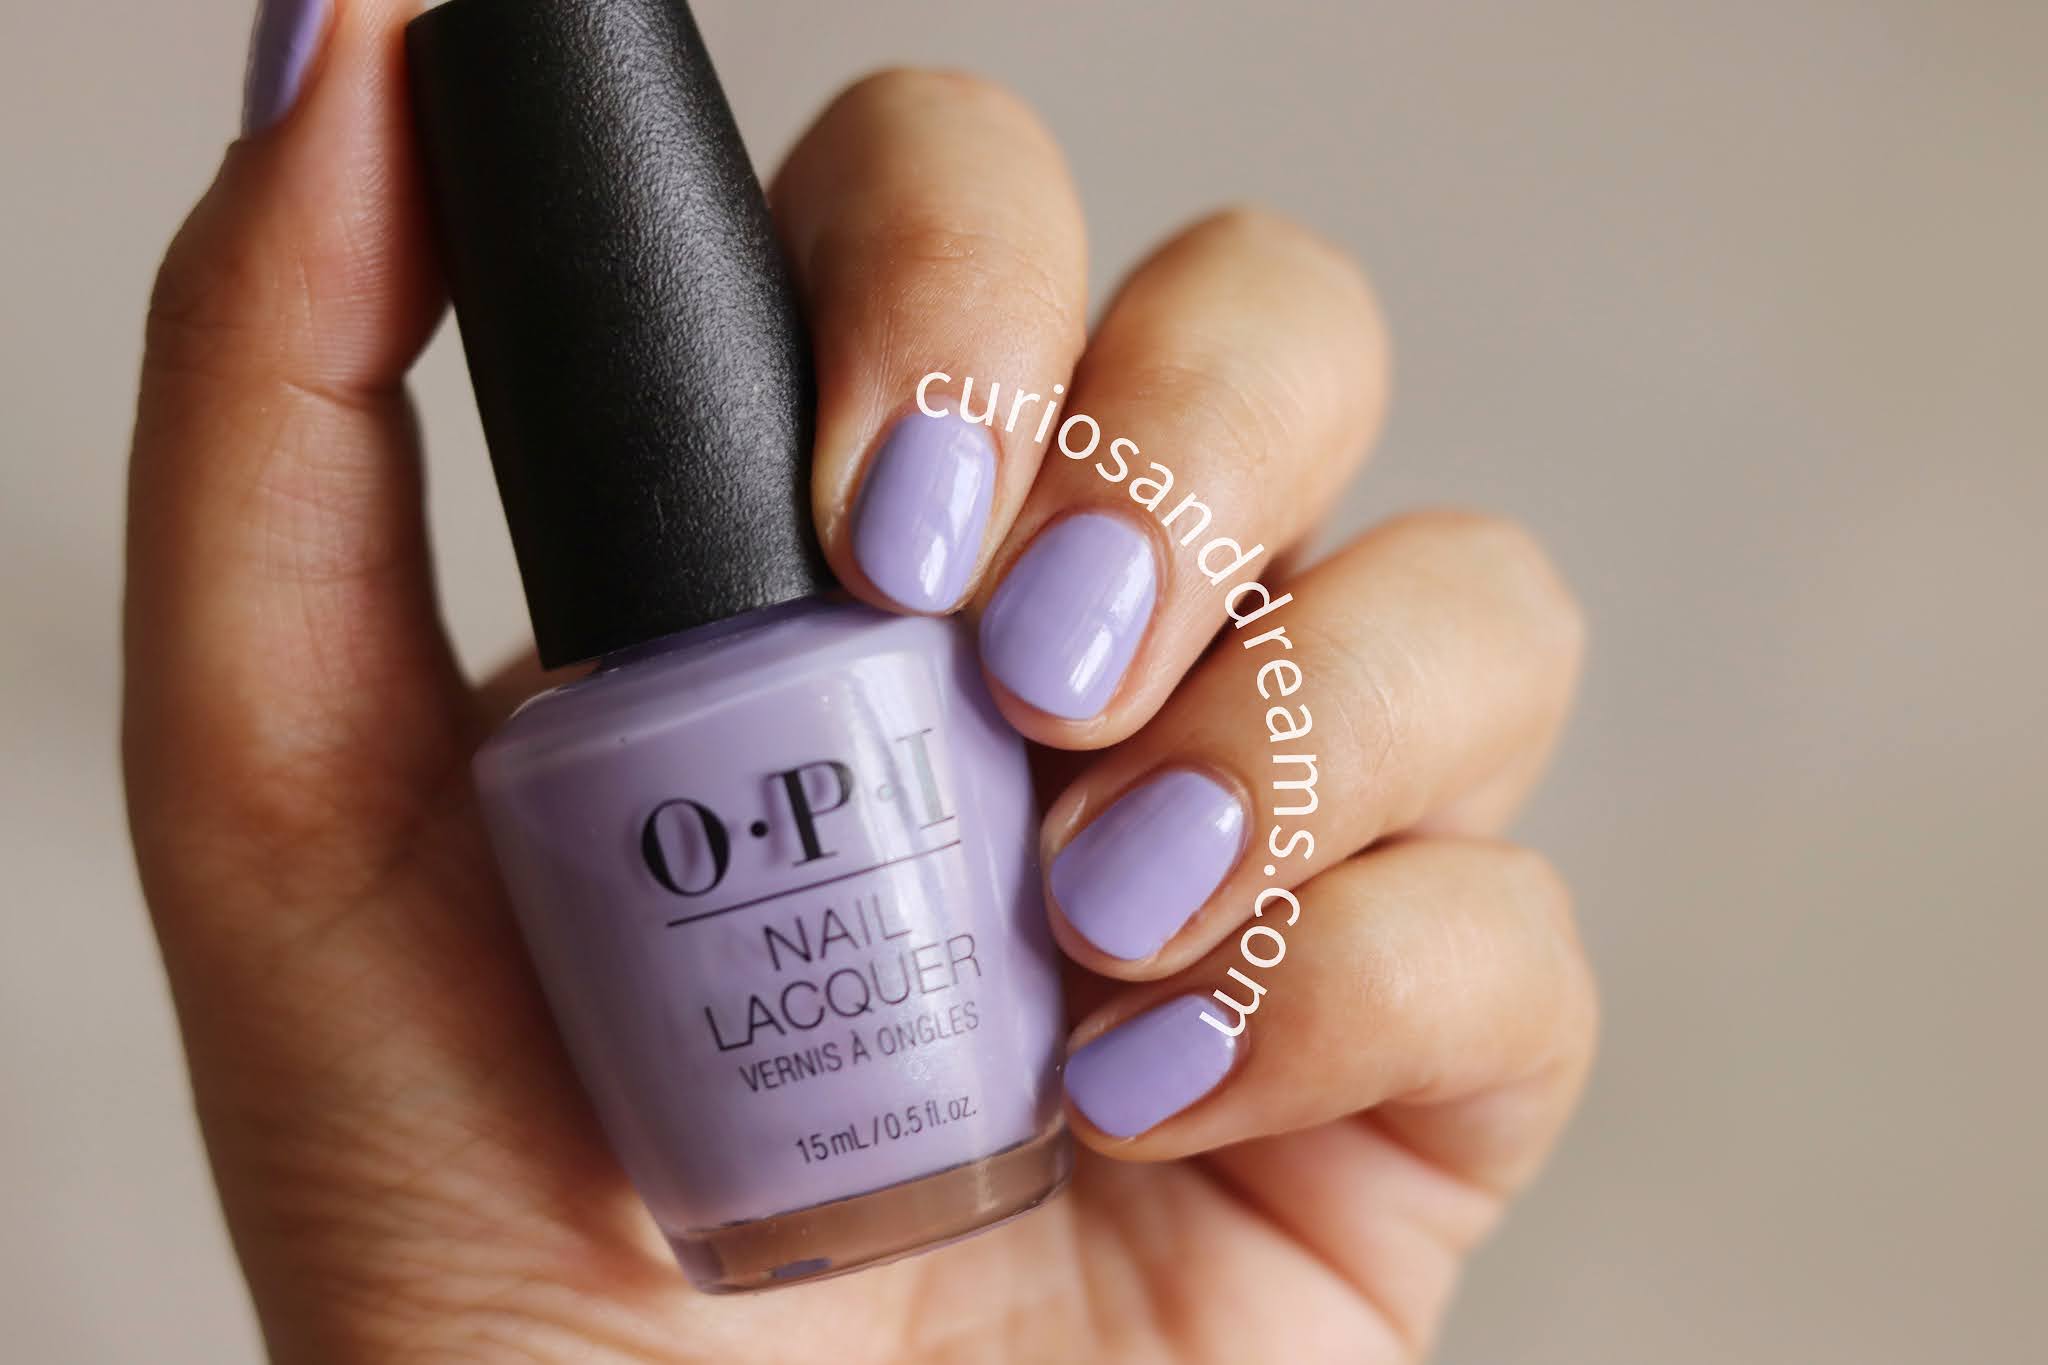 9. OPI Infinite Shine in "You're Such a Budapest" - wide 4